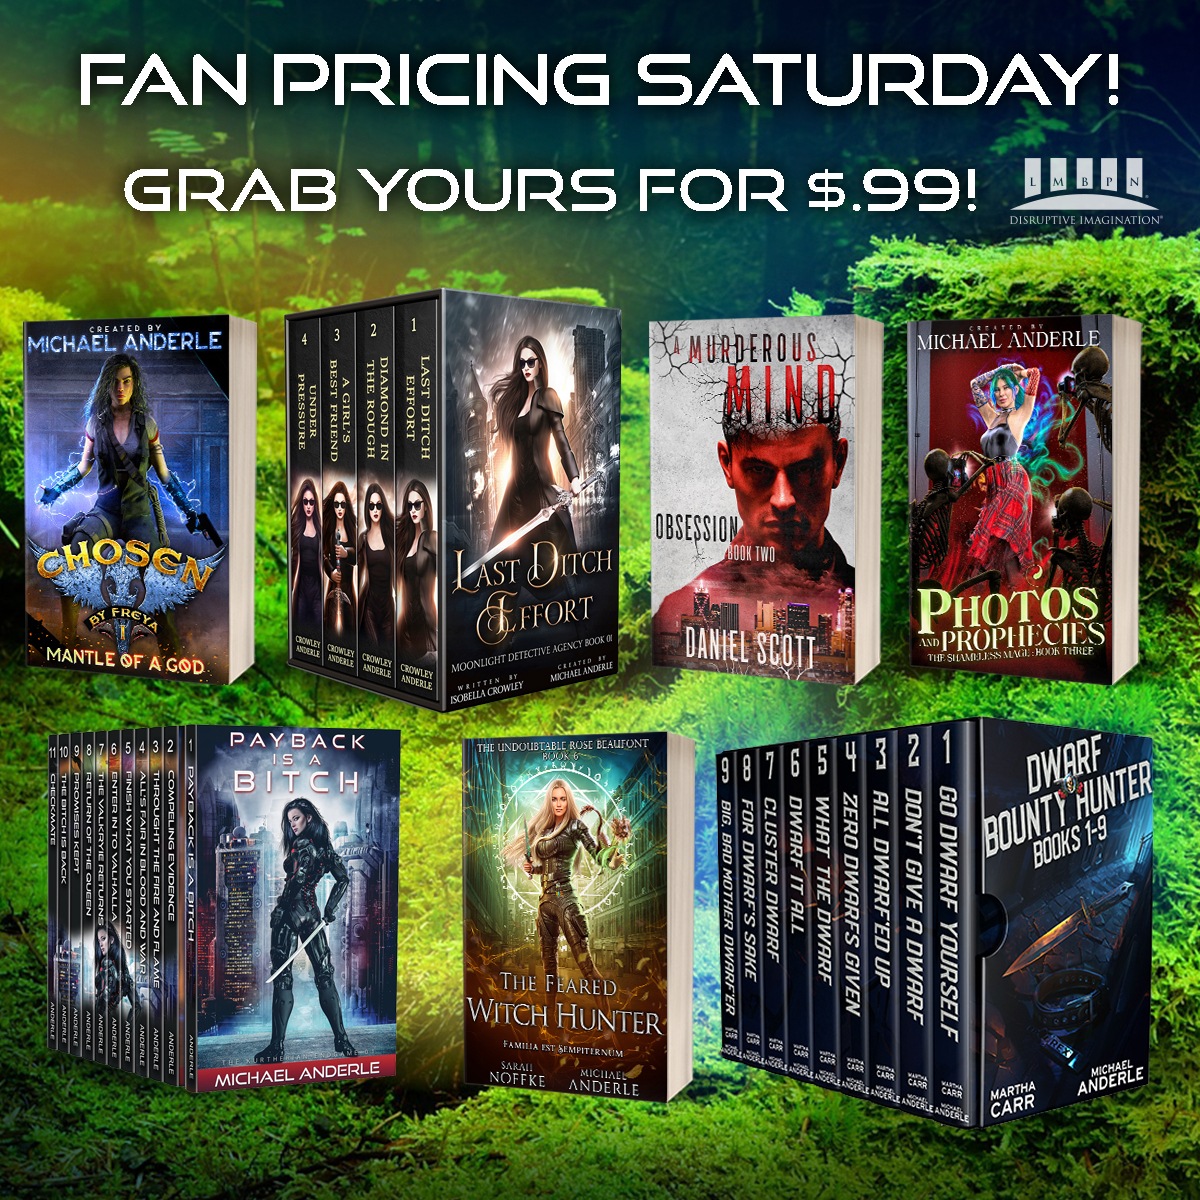 Take Your pick fan pricing banner